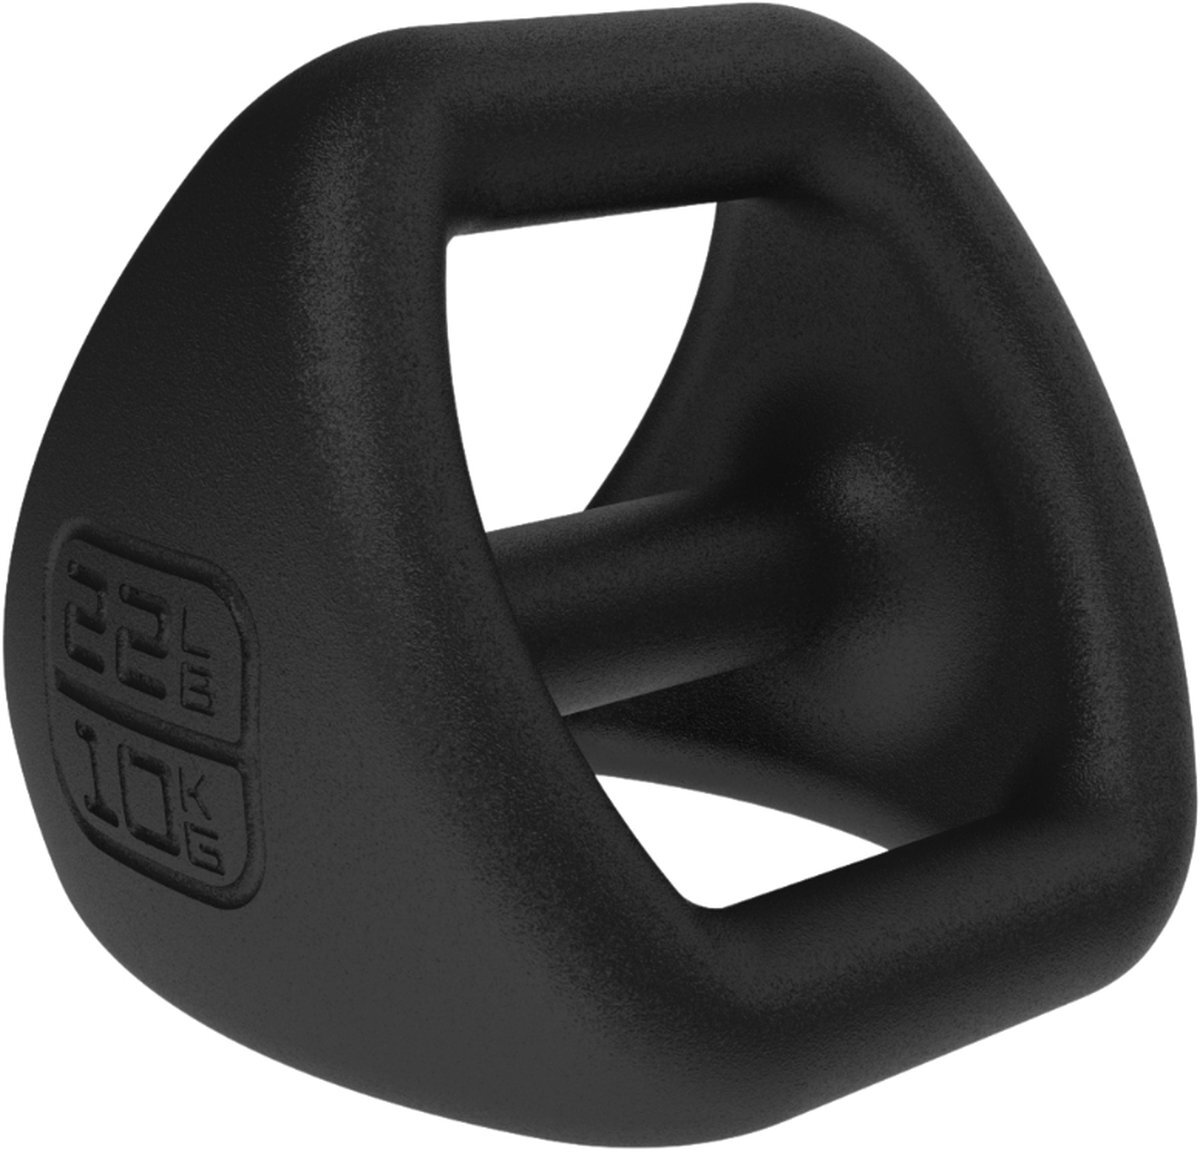 Ybell Fitness YBell Pro 10kg